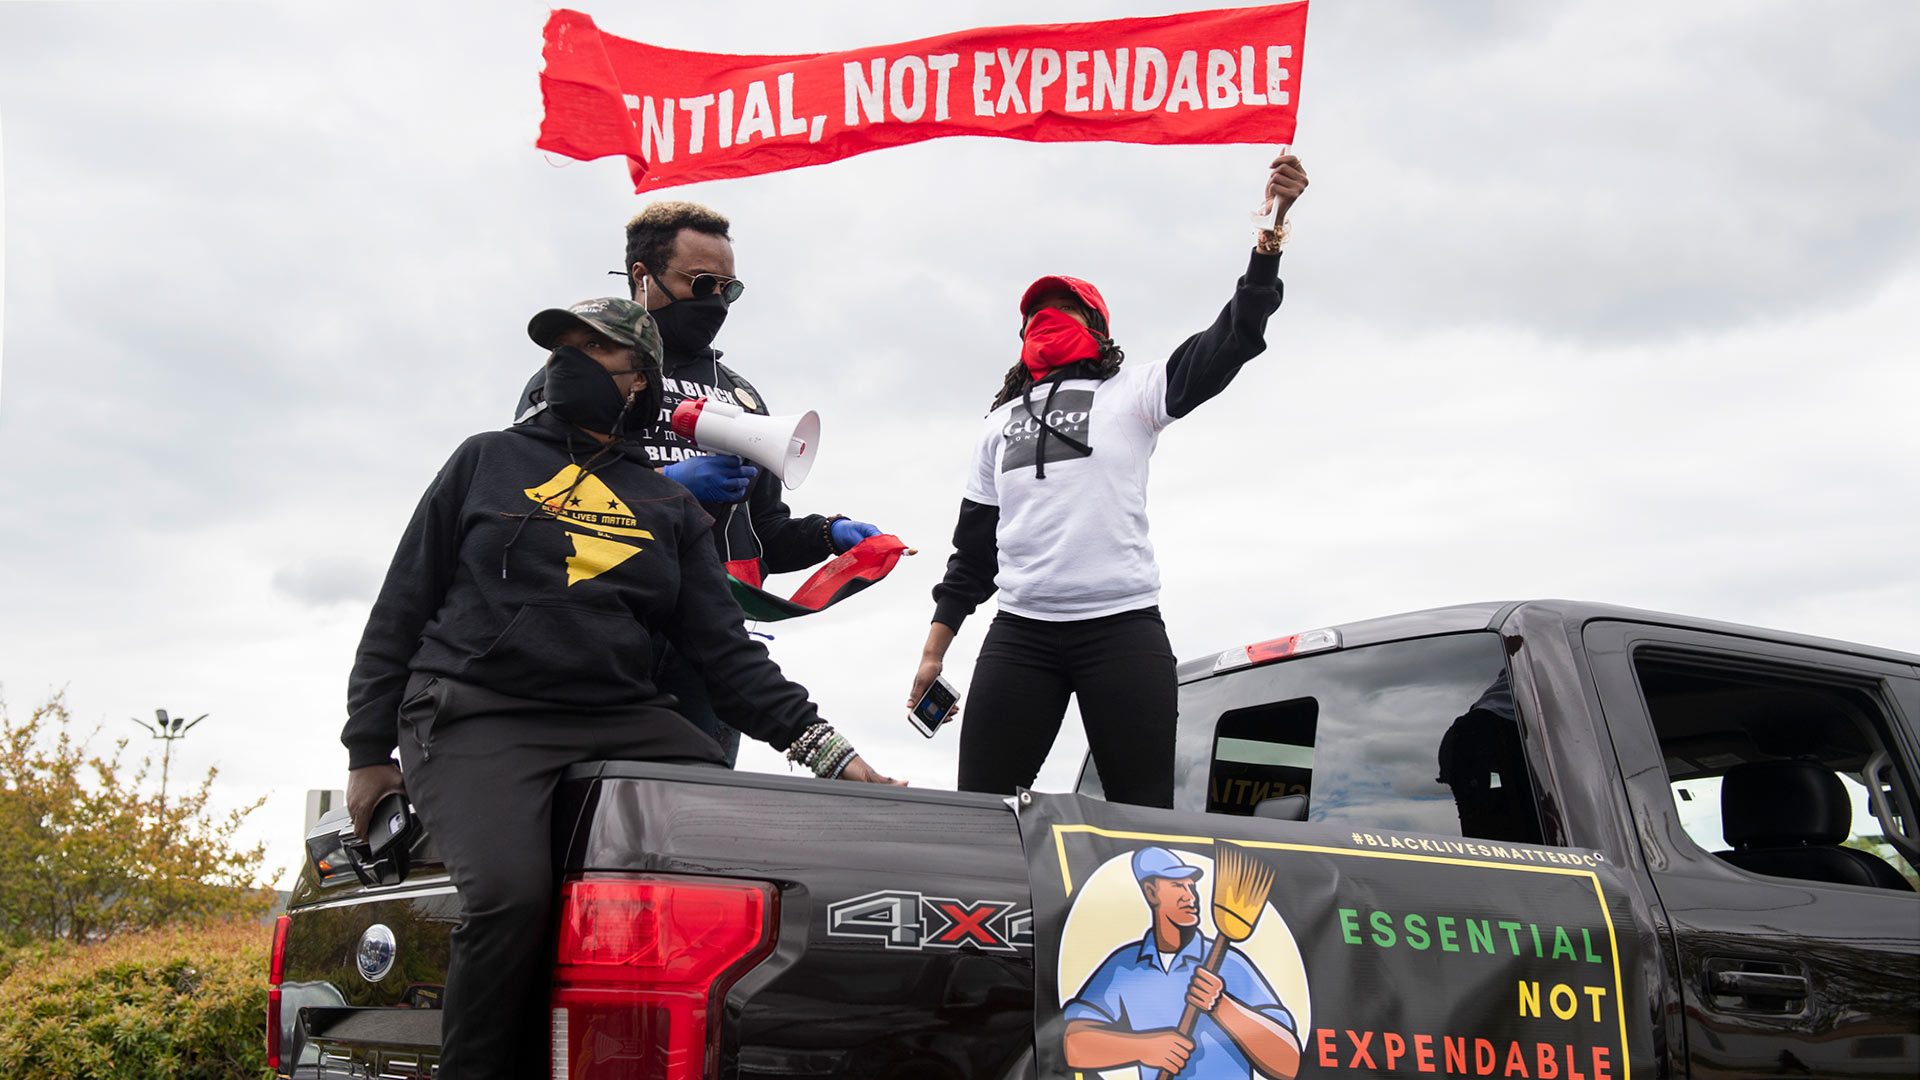 People standing on a truck waving sign saying essential, not expendable